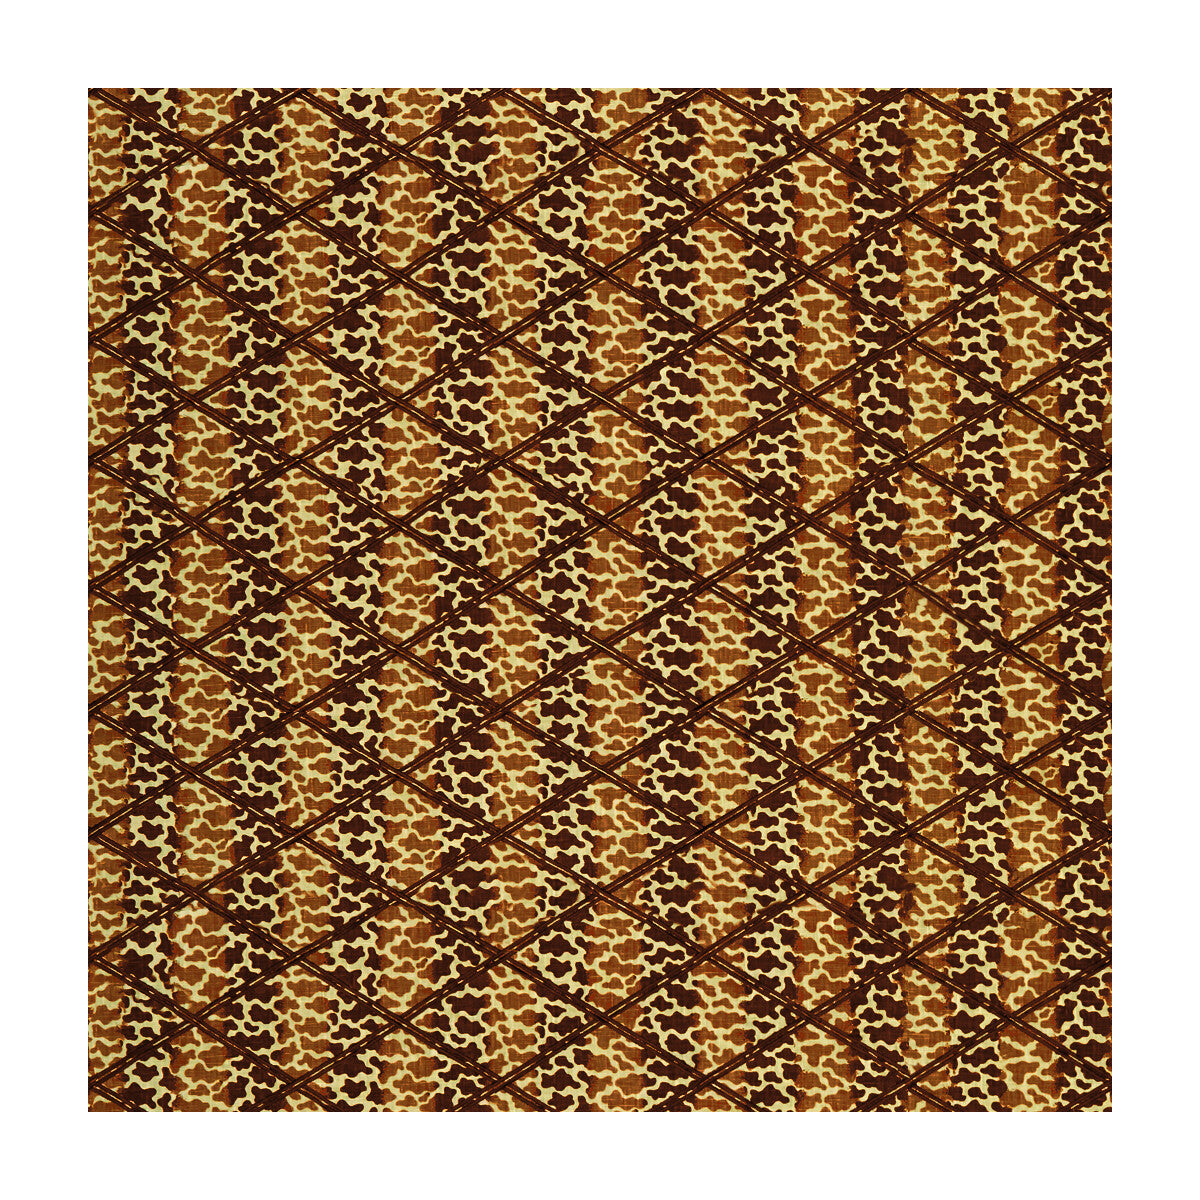 Jag Trellis fabric in brown color - pattern 2015131.86.0 - by Lee Jofa in the Parish-Hadley collection